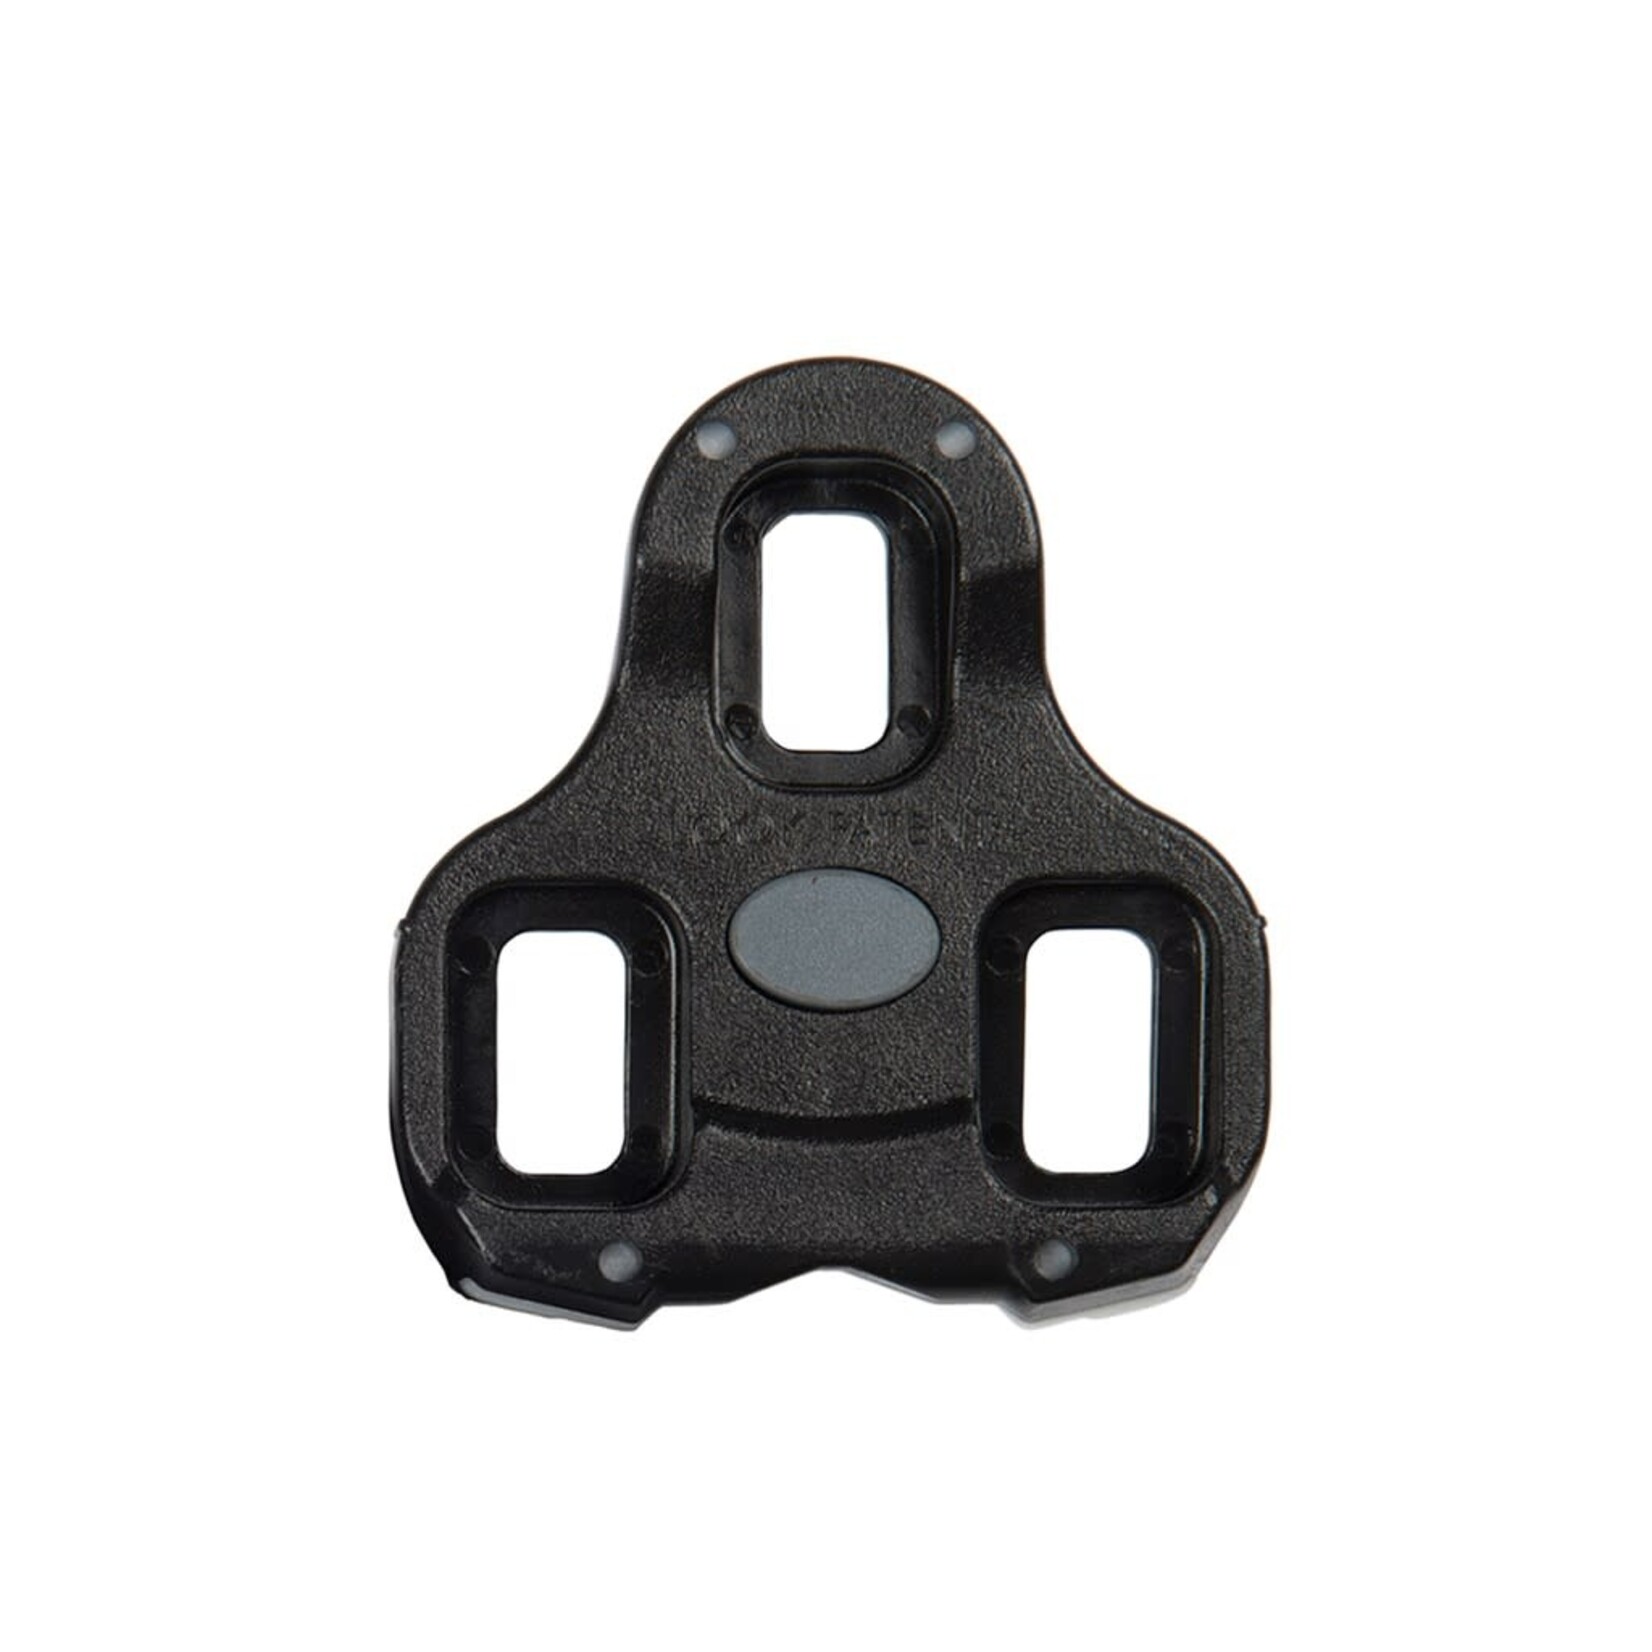 VP VP Components Perfect Placement Cleats KEO - Black 0deg Fixed